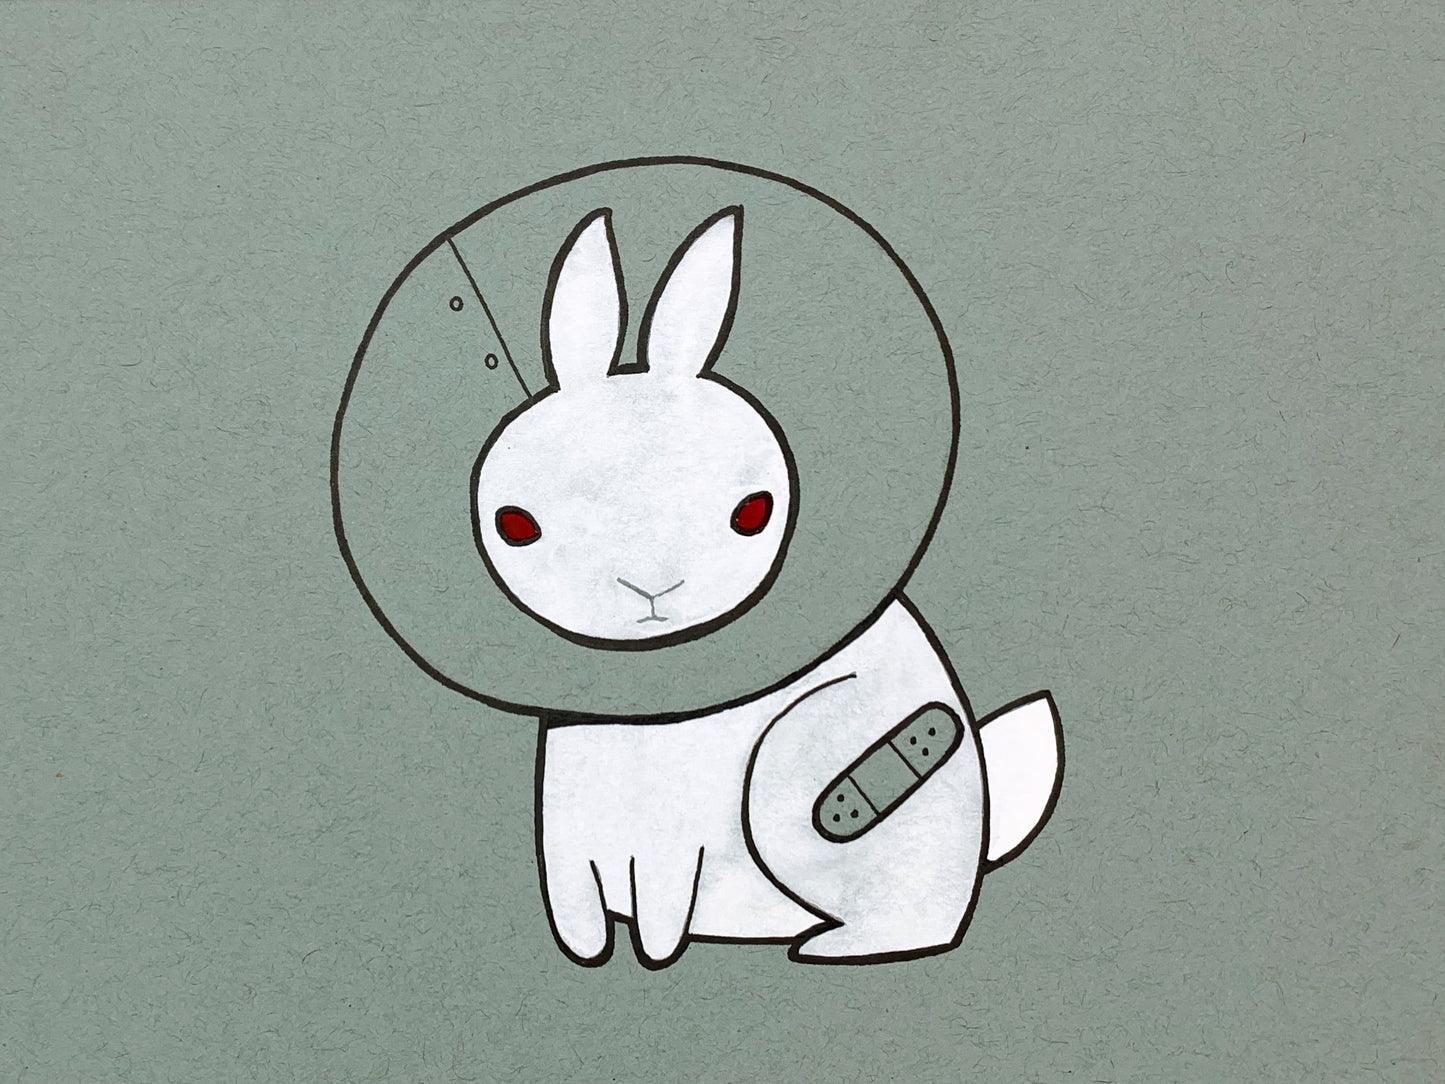 Original illustration of a white rabbit (bunny) wearing a cone collar (cone of shame) with a band-aid over an injurred leg. Made using ink, watercolor, and gouache.